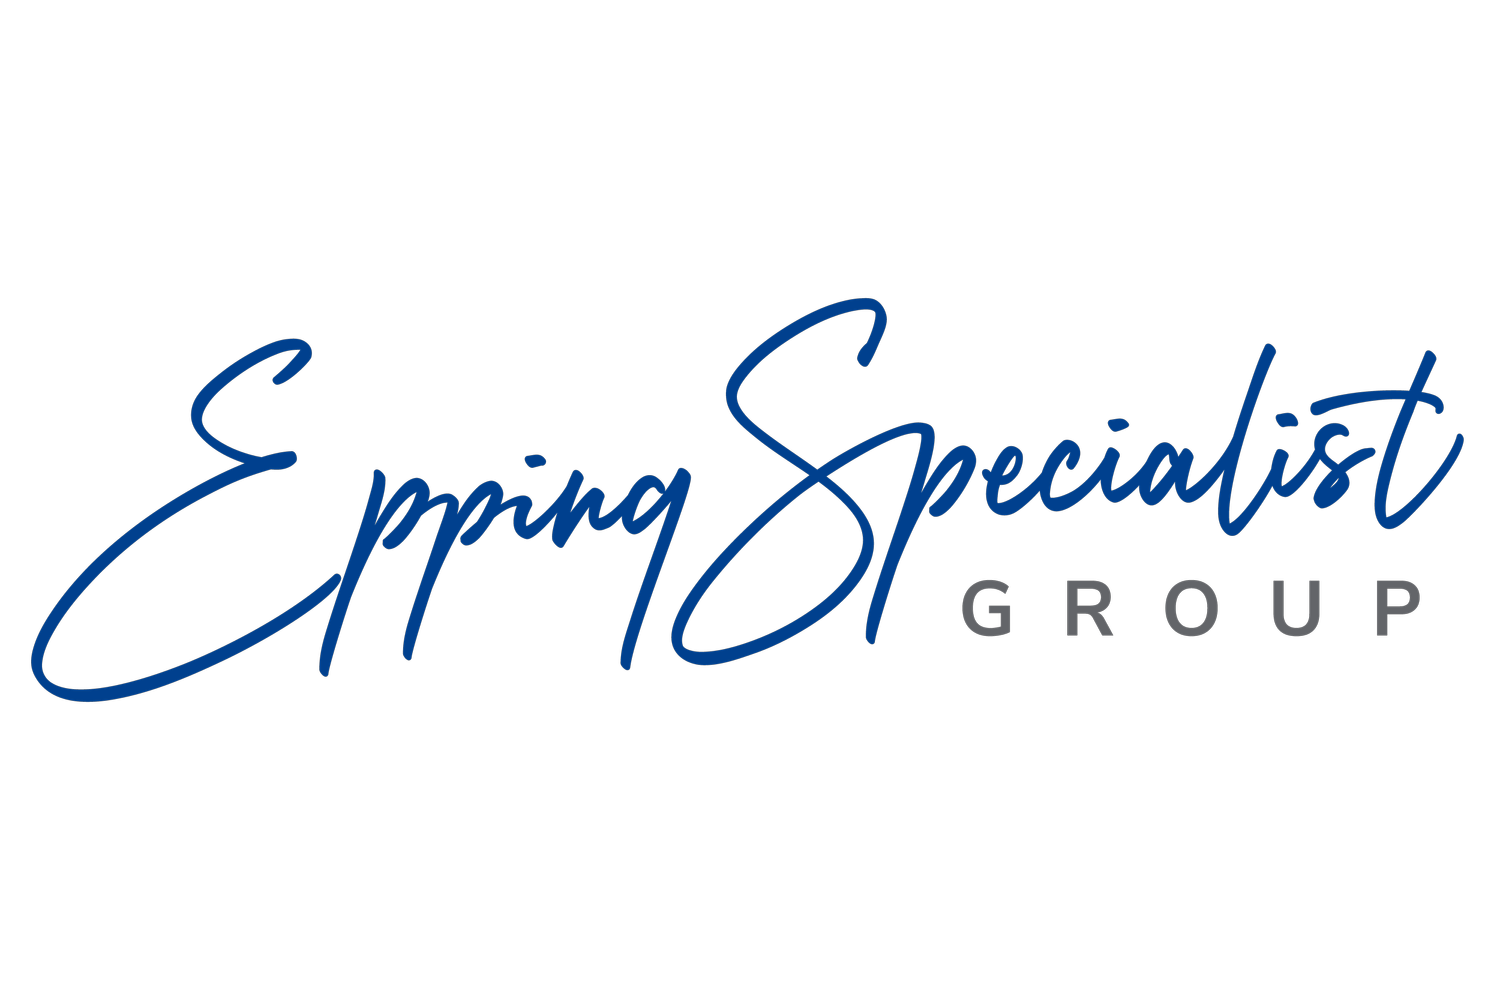 Epping Specialist Group